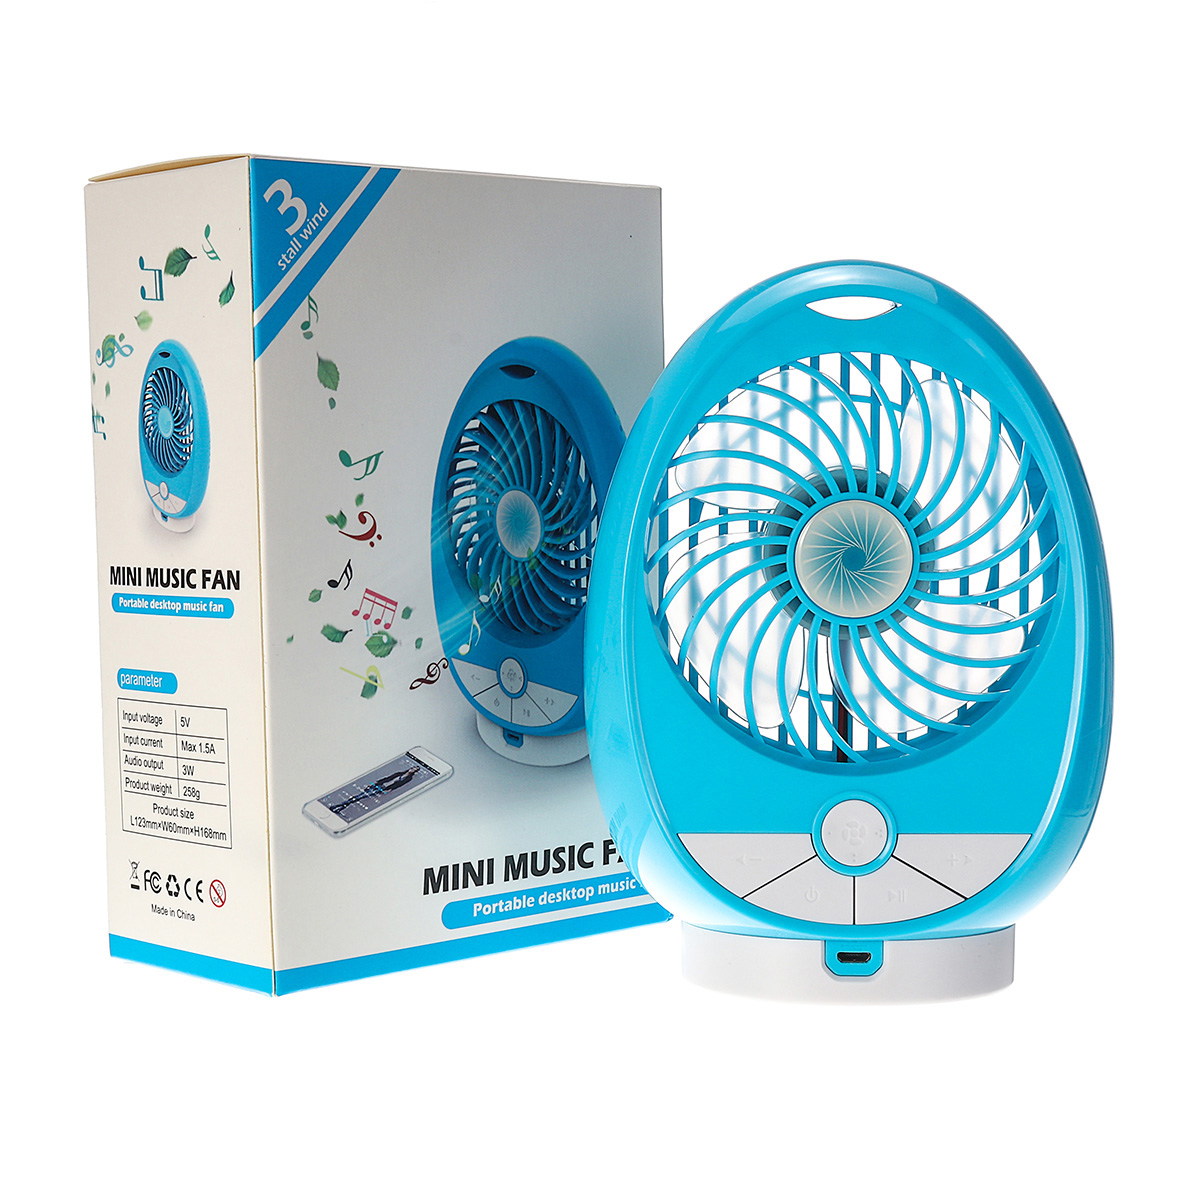 Wireless-Music-Fan-bluetoothTF-Card-Audio-Player-Party-Study-Working-Camping-Mini-Cooling-Desktop-Fa-1531069-9